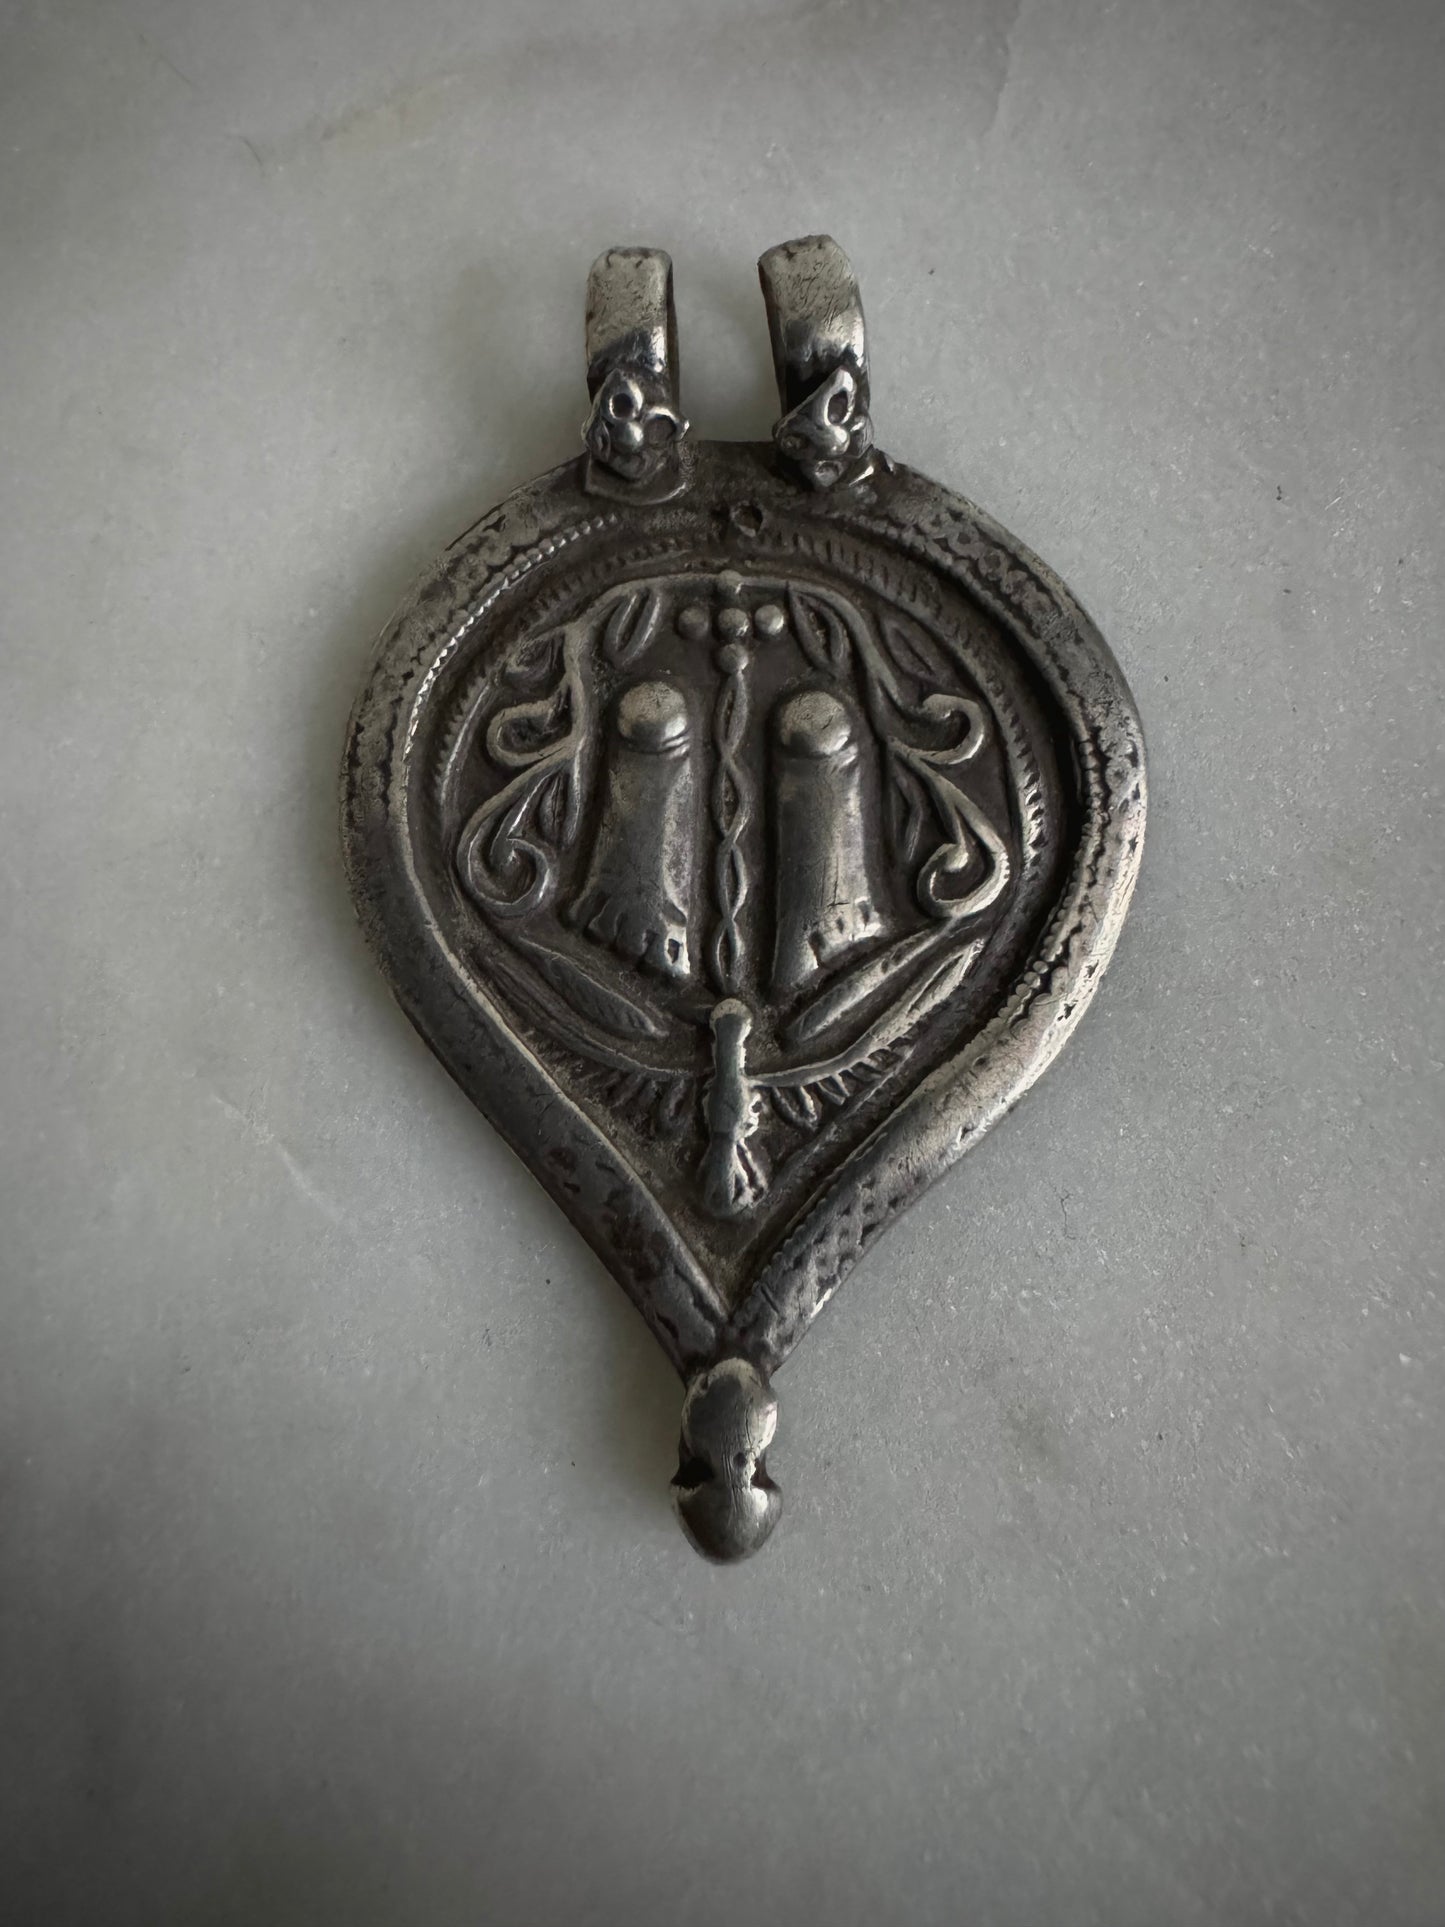 Feet of Lord Vishnu, antique silver amulet from rajasthan